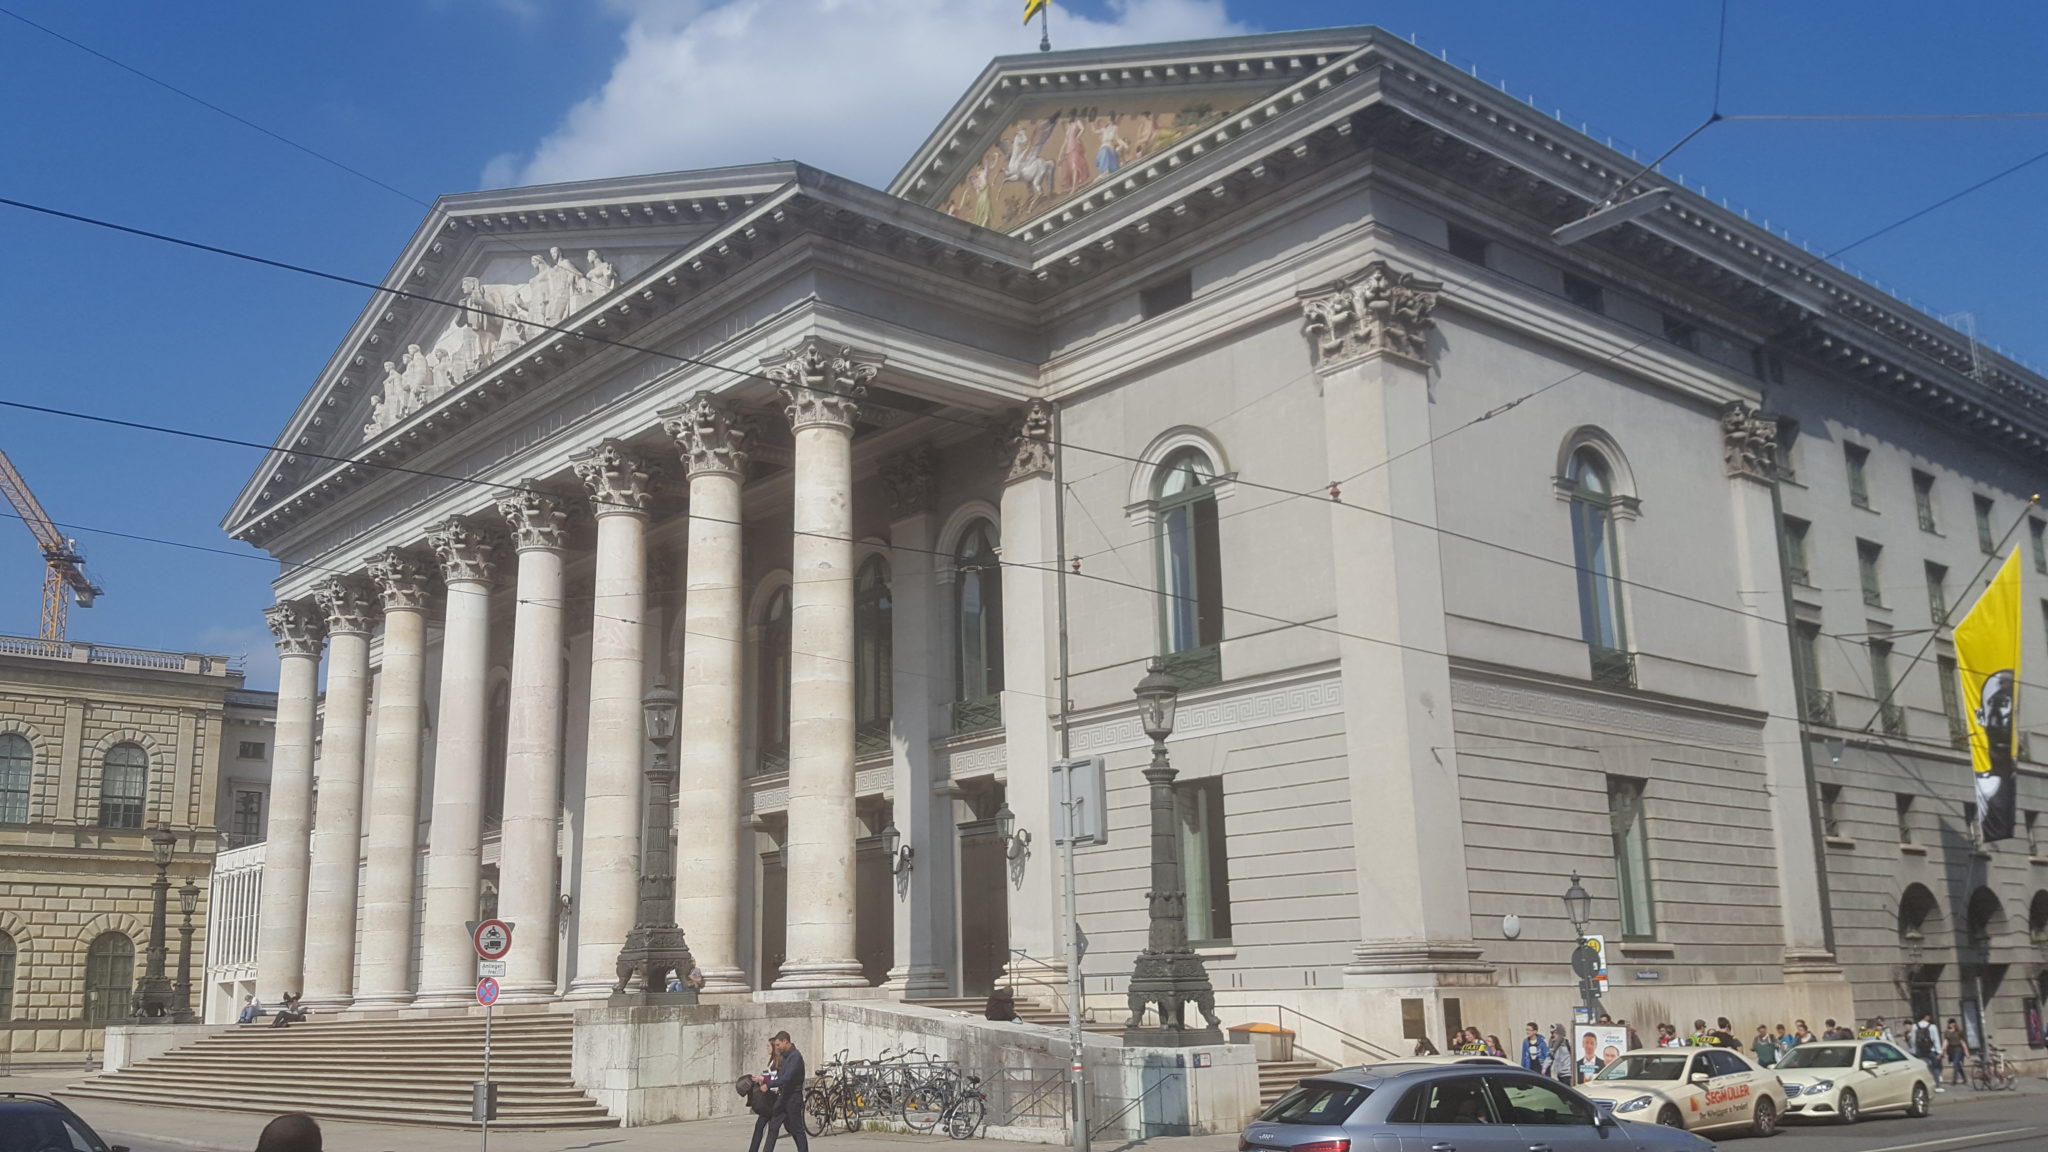 Bayerische Staatsoper Opera House - Top 10 Things to See and Do in Munich, Germany